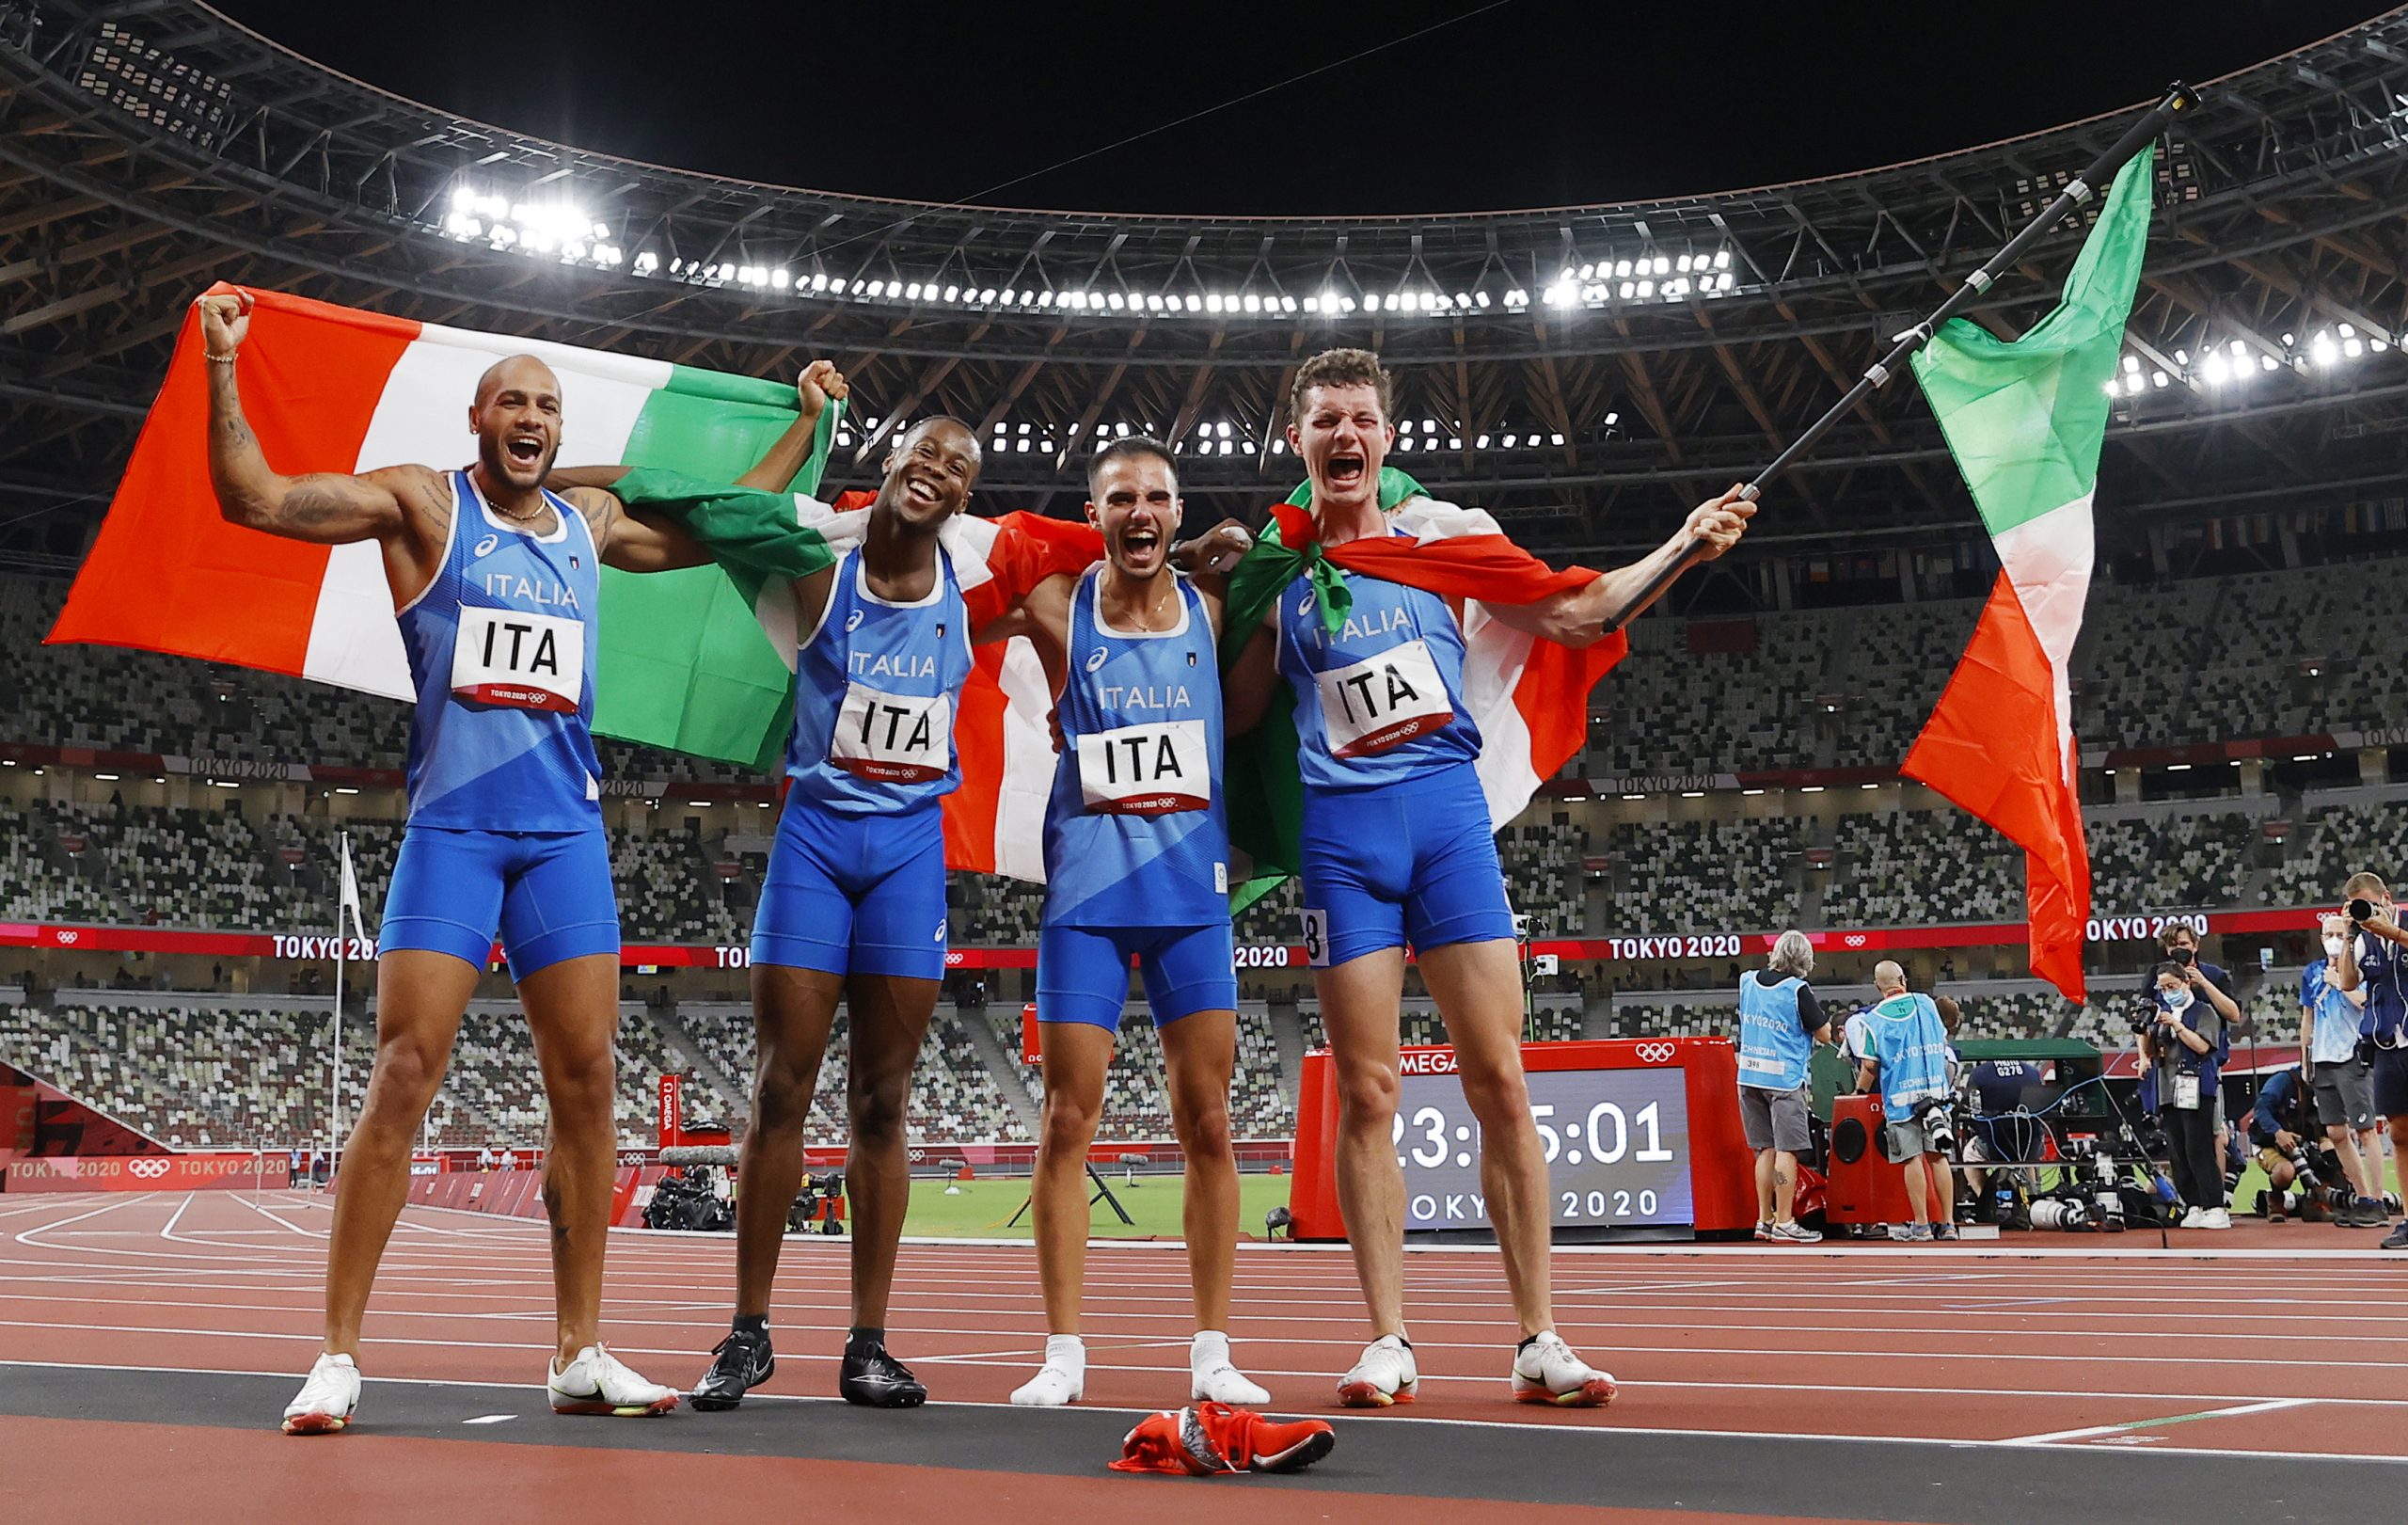 epa09401576 Lamont Marcell Jacobs, Eseosa Fostine Desalu, Lorenzo Patta and Filippo Tortu of Italy celebrate after winning the Men's 4x100m Relay final of the Athletics events of the Tokyo 2020 Olympic Games at the Olympic Stadium in Tokyo, Japan, 06 August 2021.  EPA/VALDRIN XHEMAJ